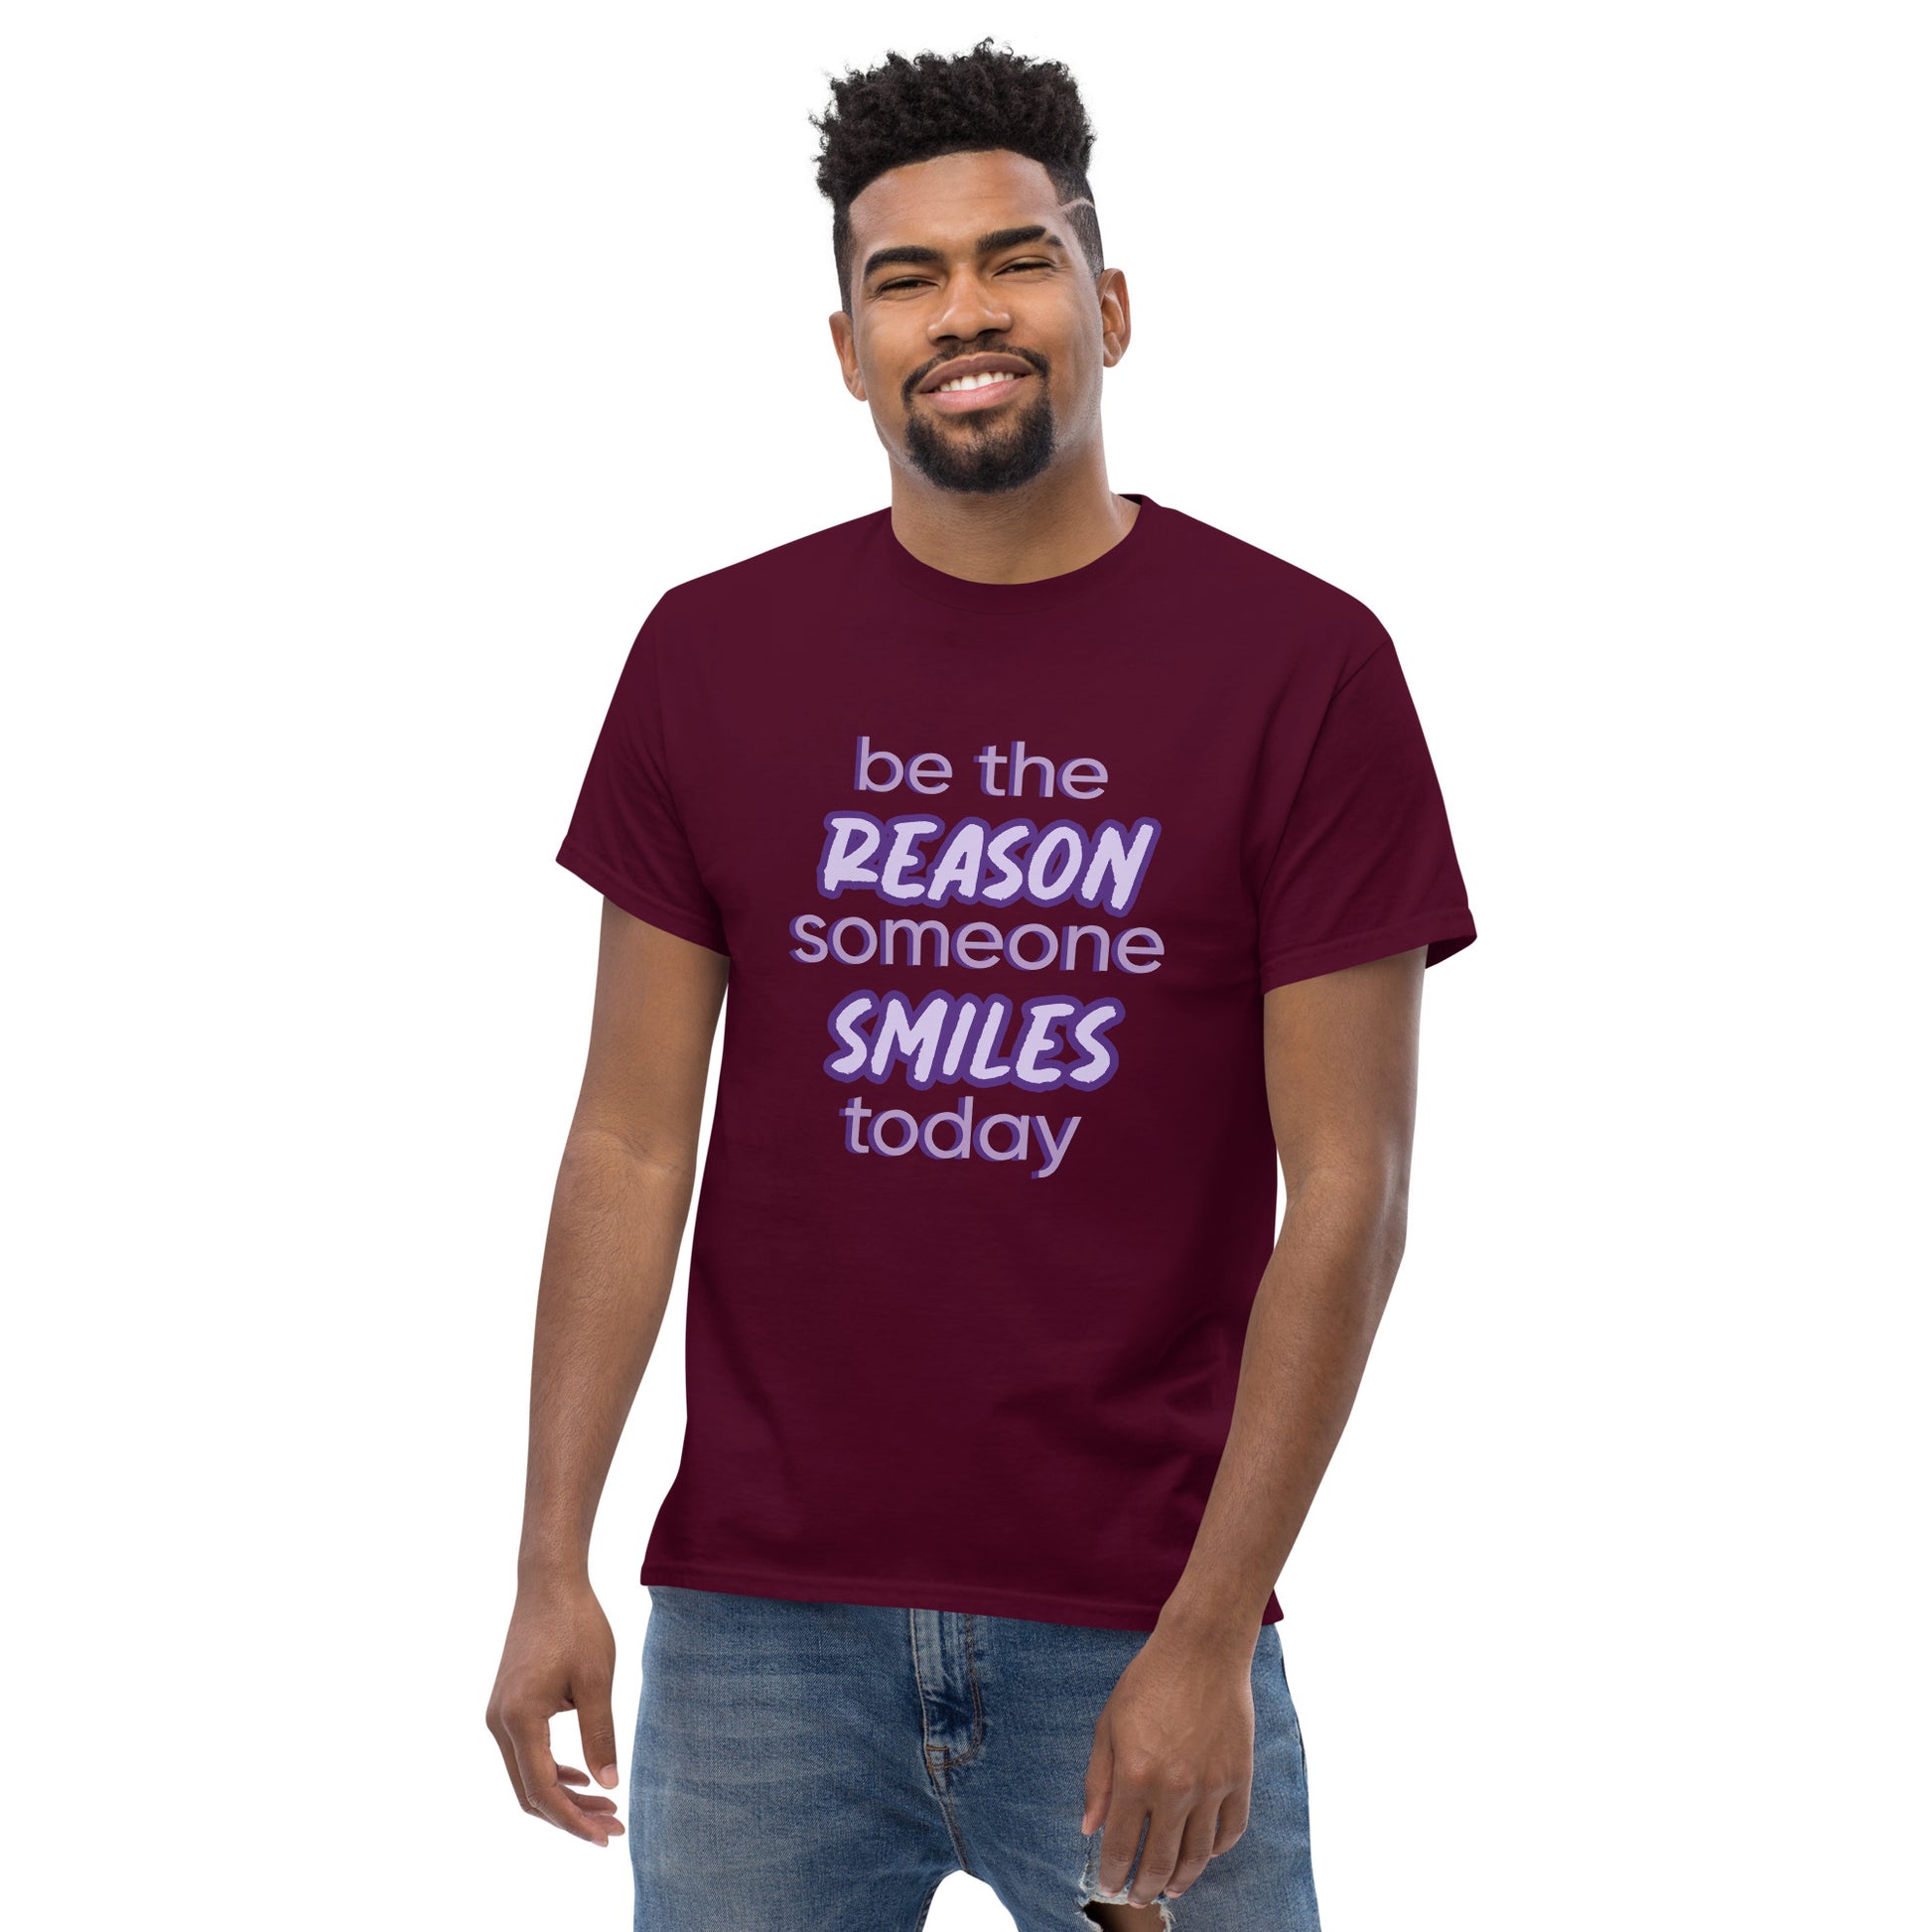 Men with maroon T-shirt and the quote "be the reason someone smiles today" in purple on it. 